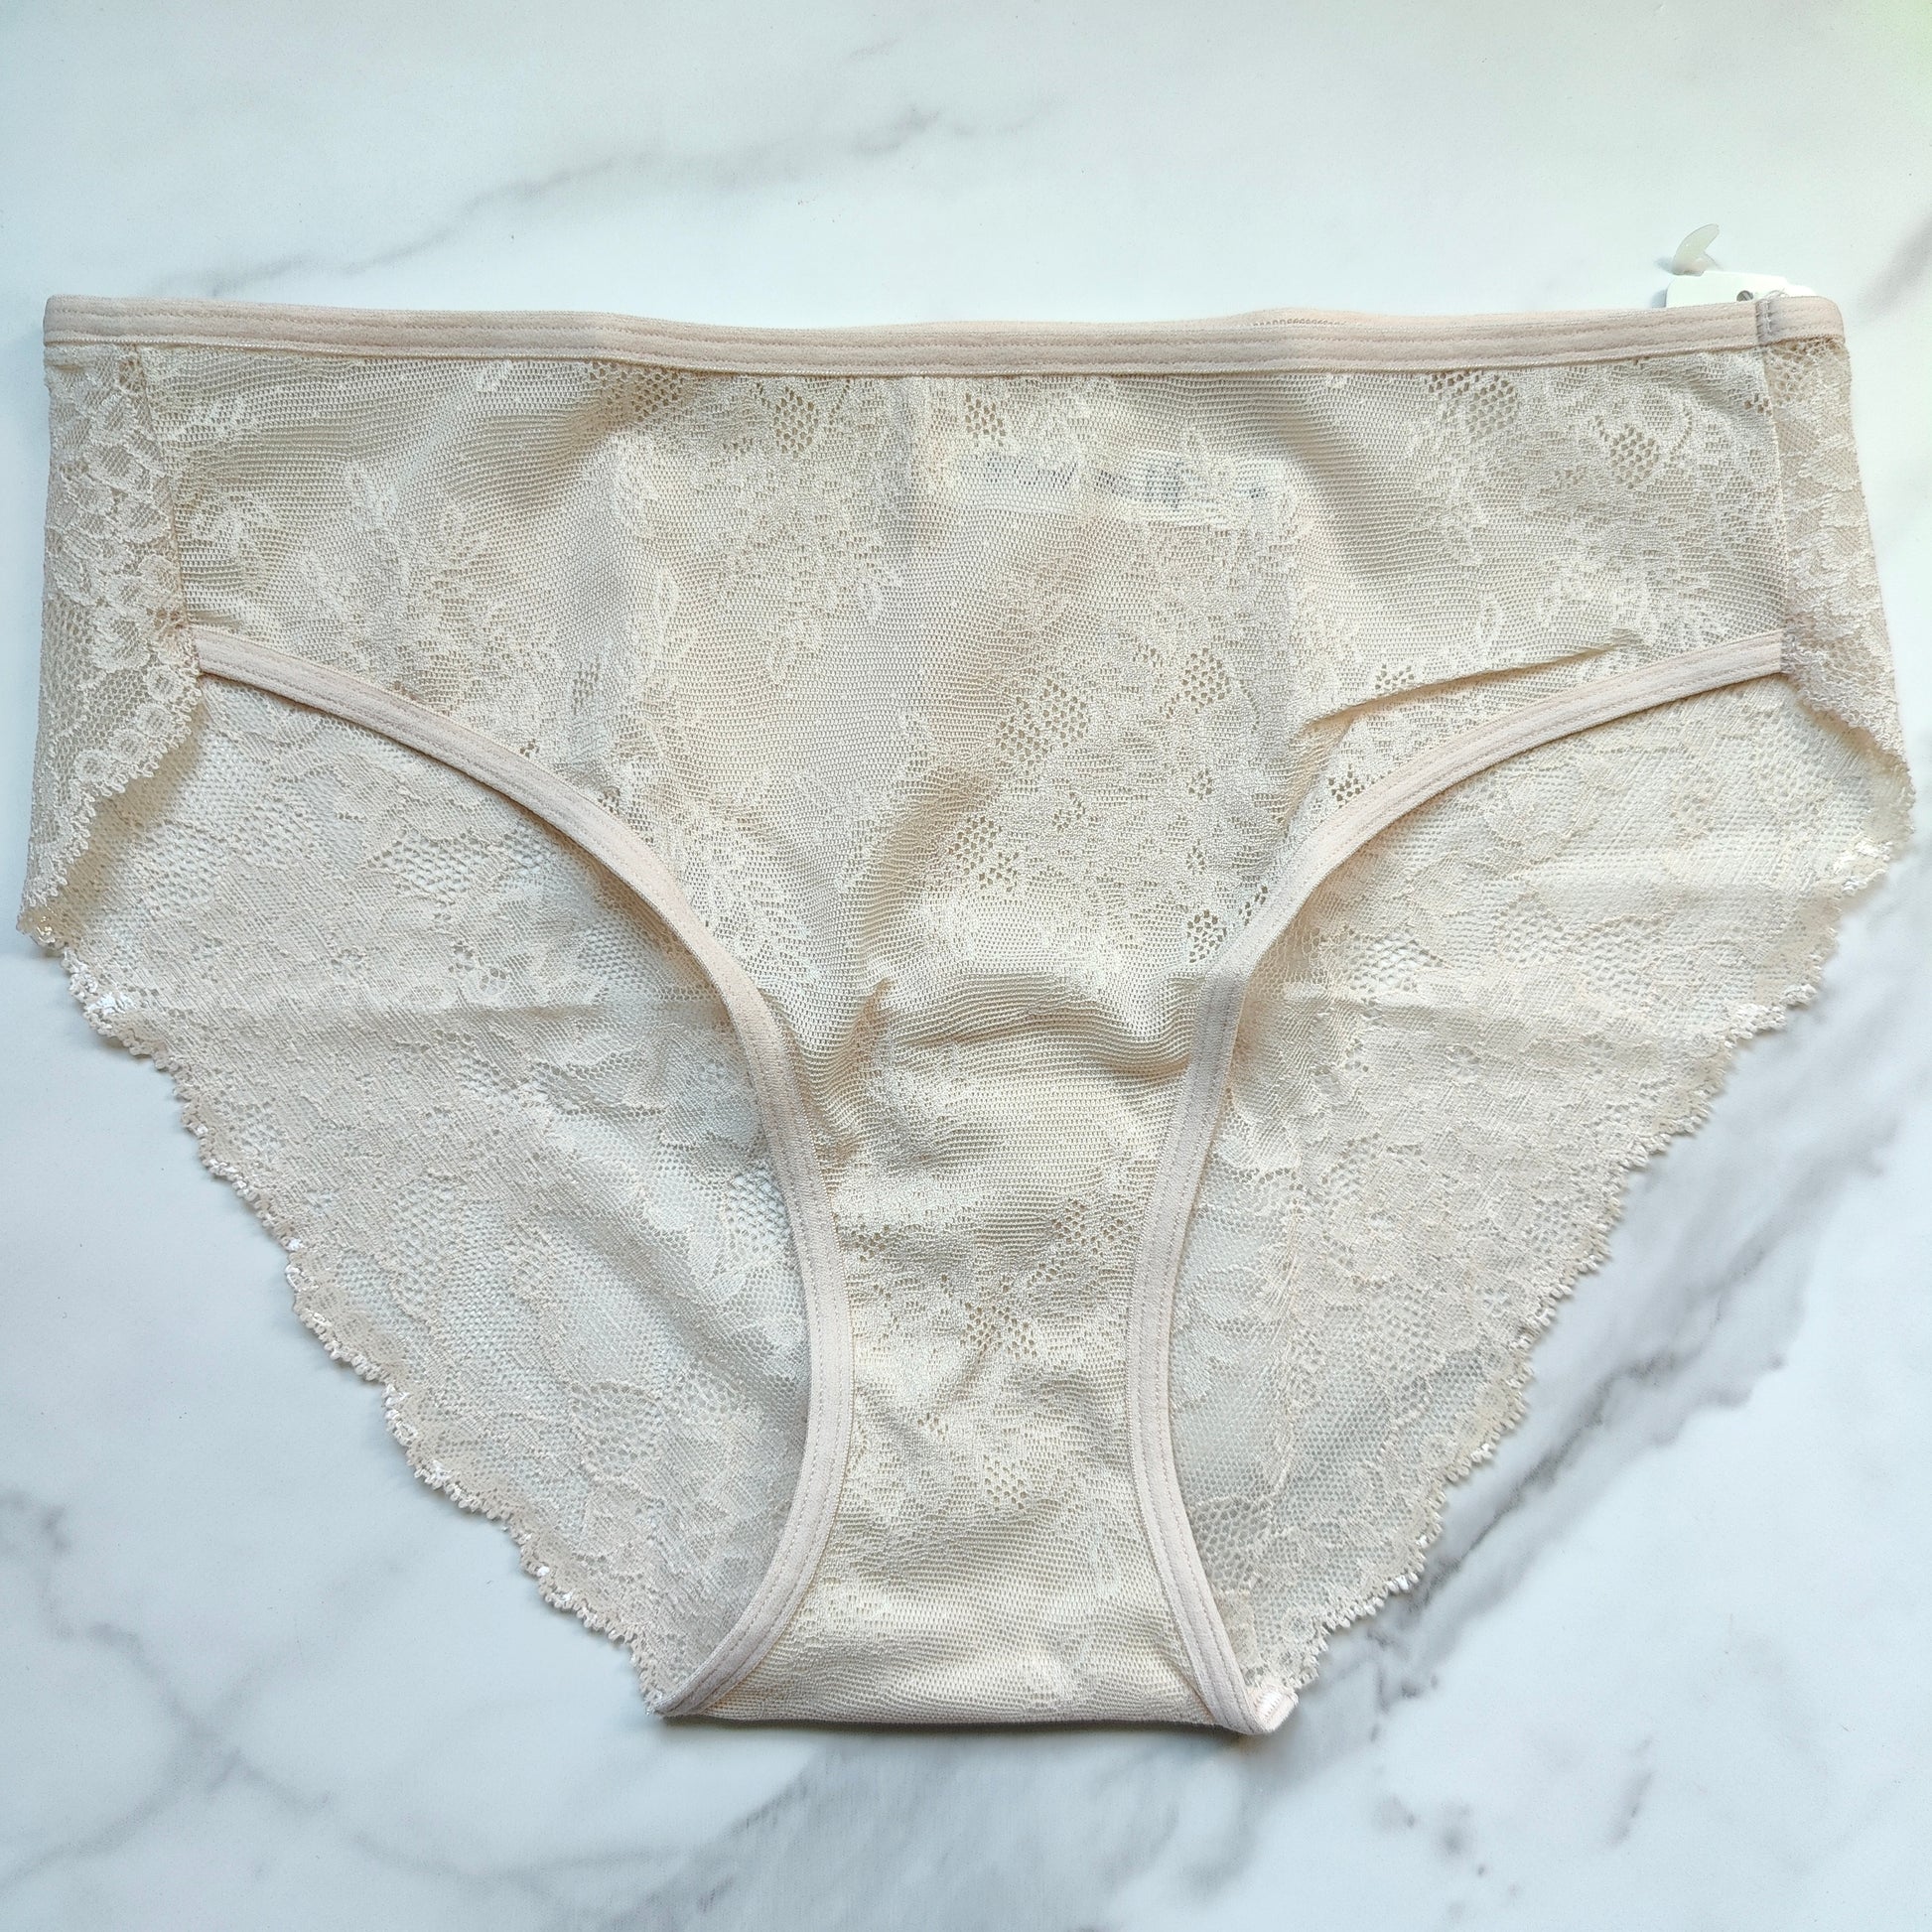 Soma Vanishing Edge Microfiber with Lace Hipster Underwear, White